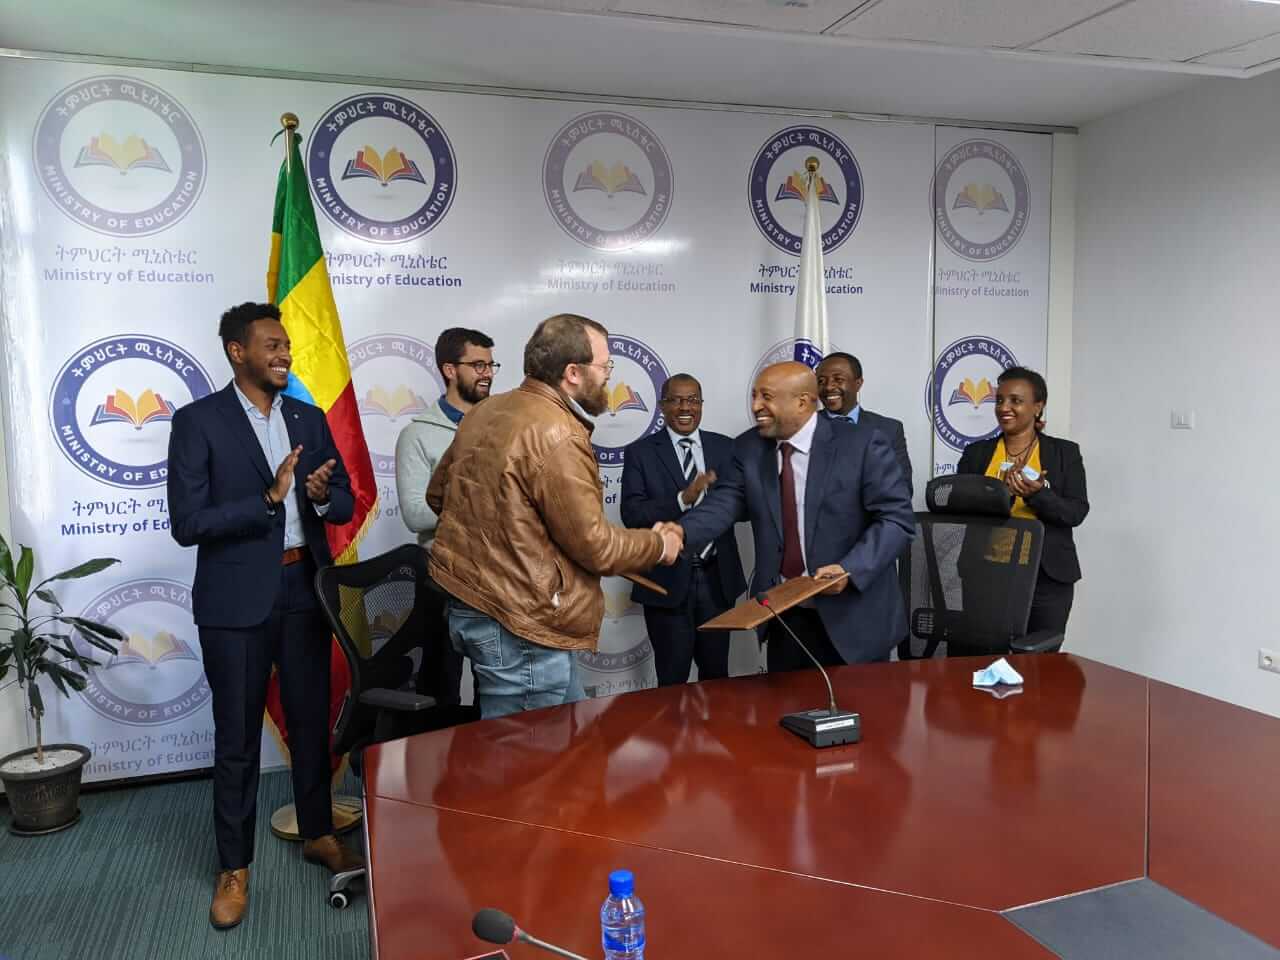 Cardano (ADA) is on track with its digital transformation of Ethiopia